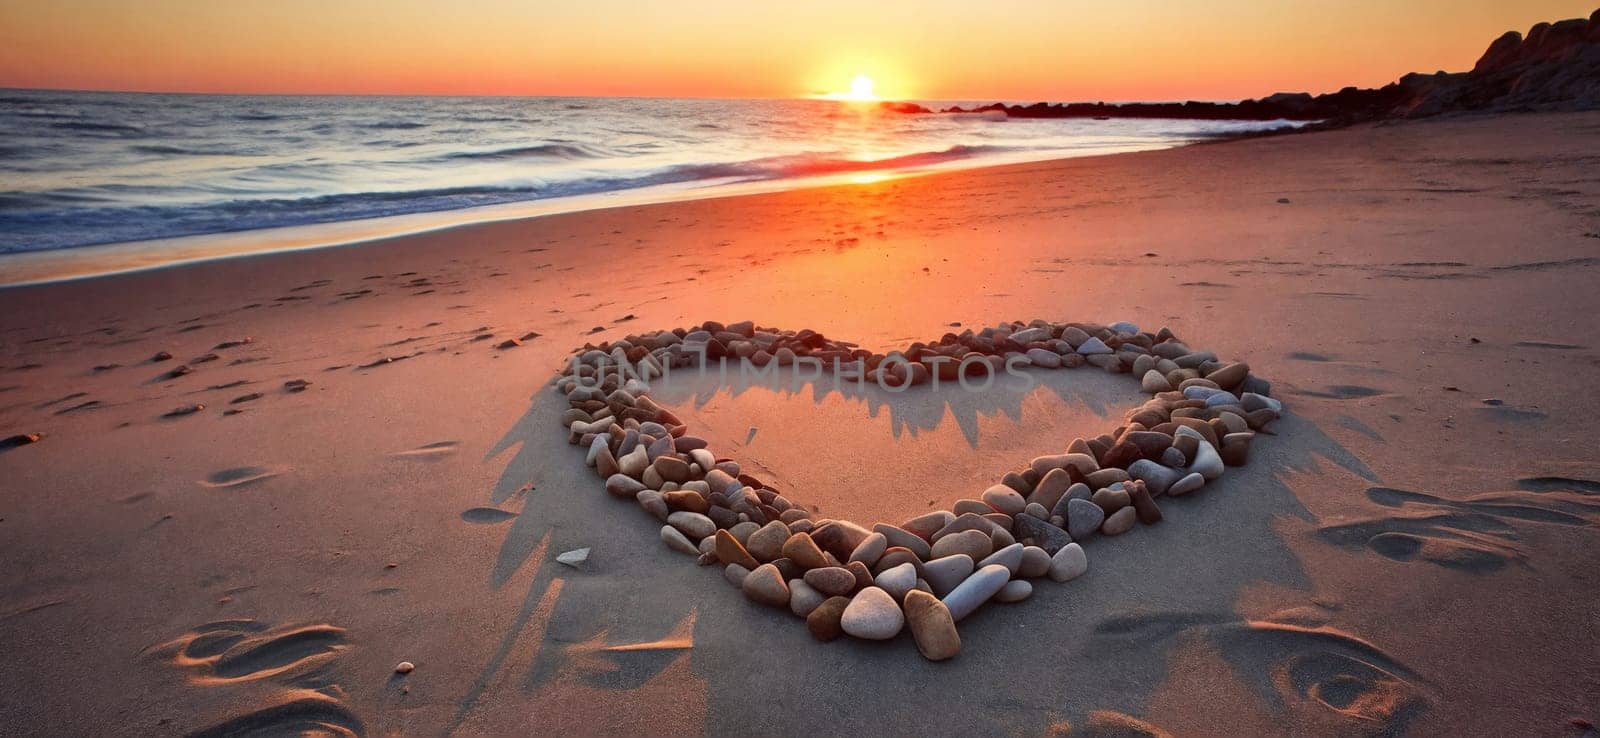 Heart-shaped stones on a sandy beach, illuminated by the warm colors of a sunset. A romantic scene perfect for expressing love